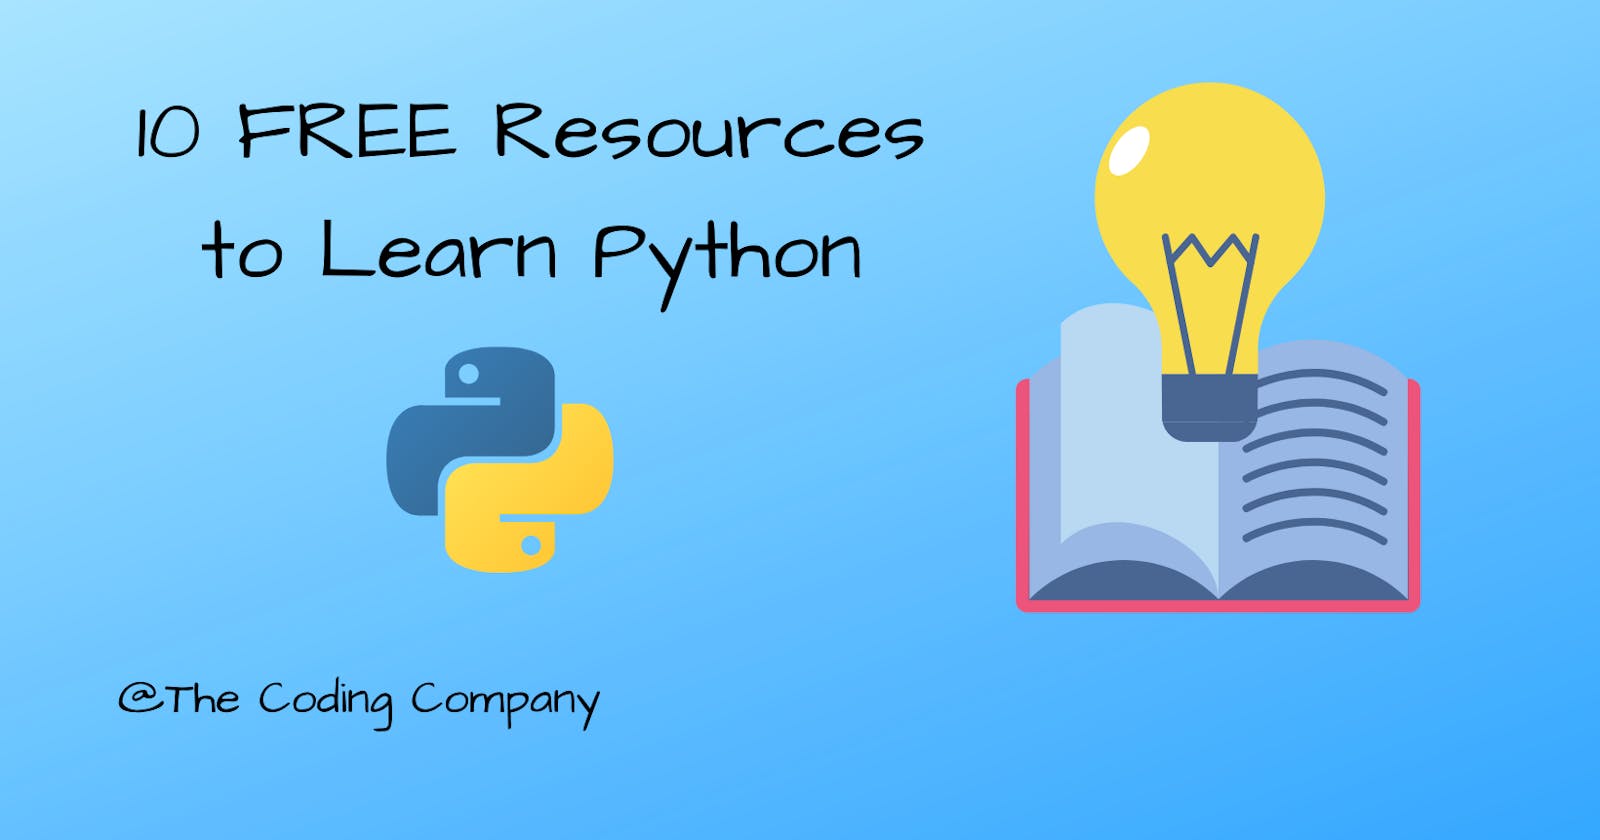 10 FREE Resources to Learn Python